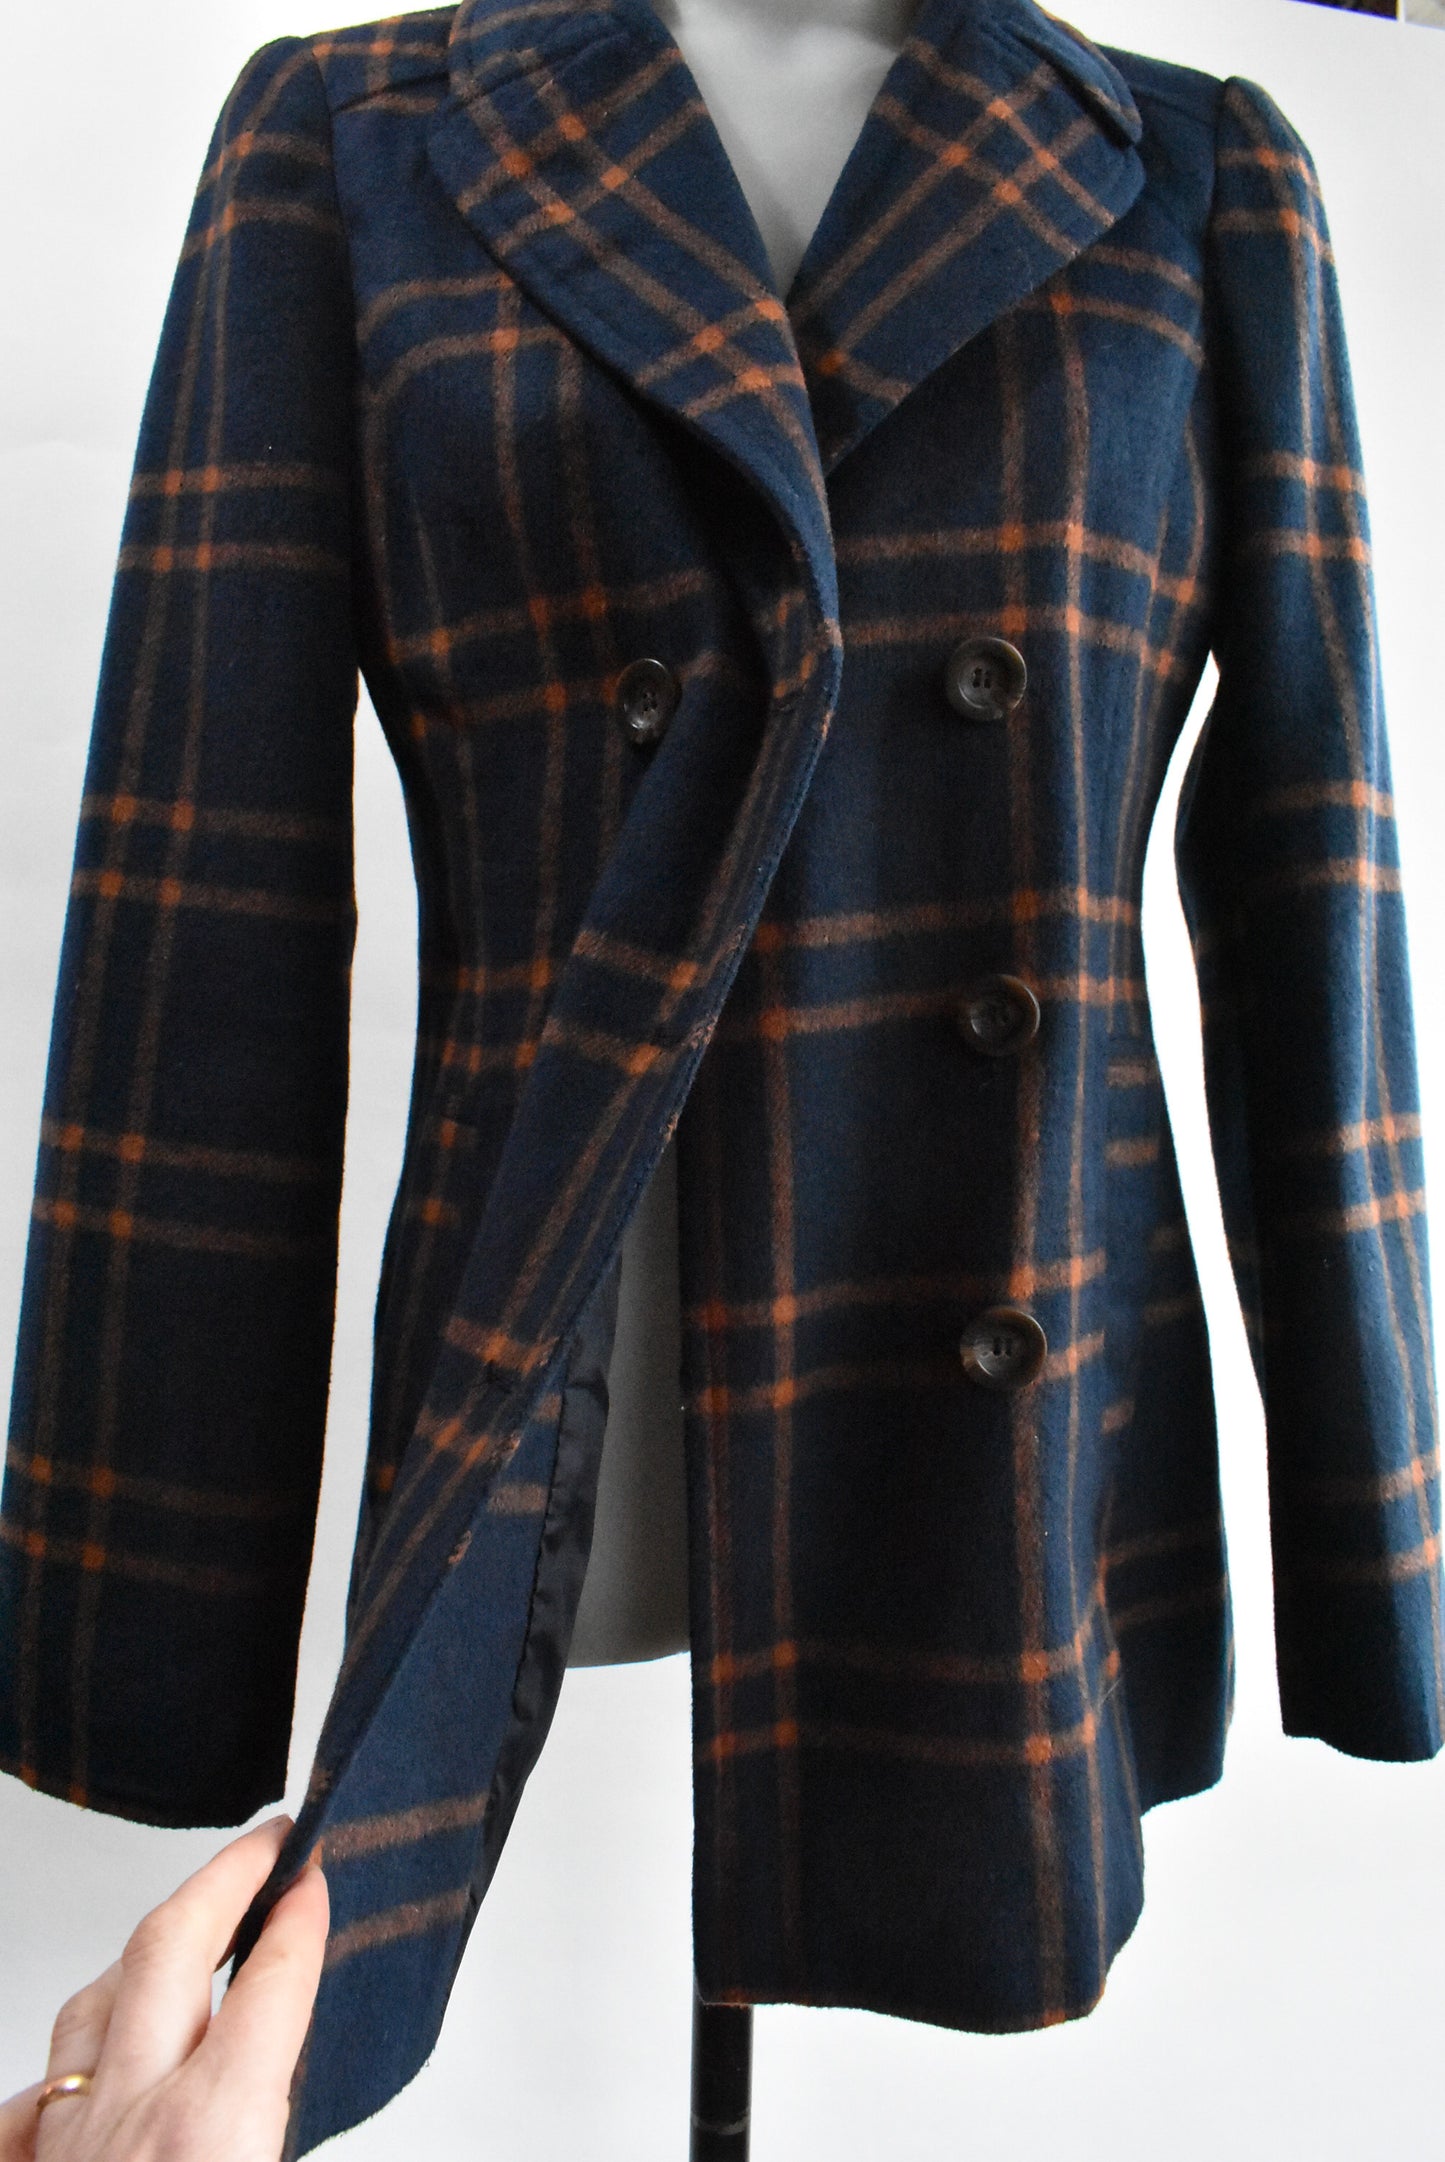 Glassons plaid double breasted fitted winter coat, 8